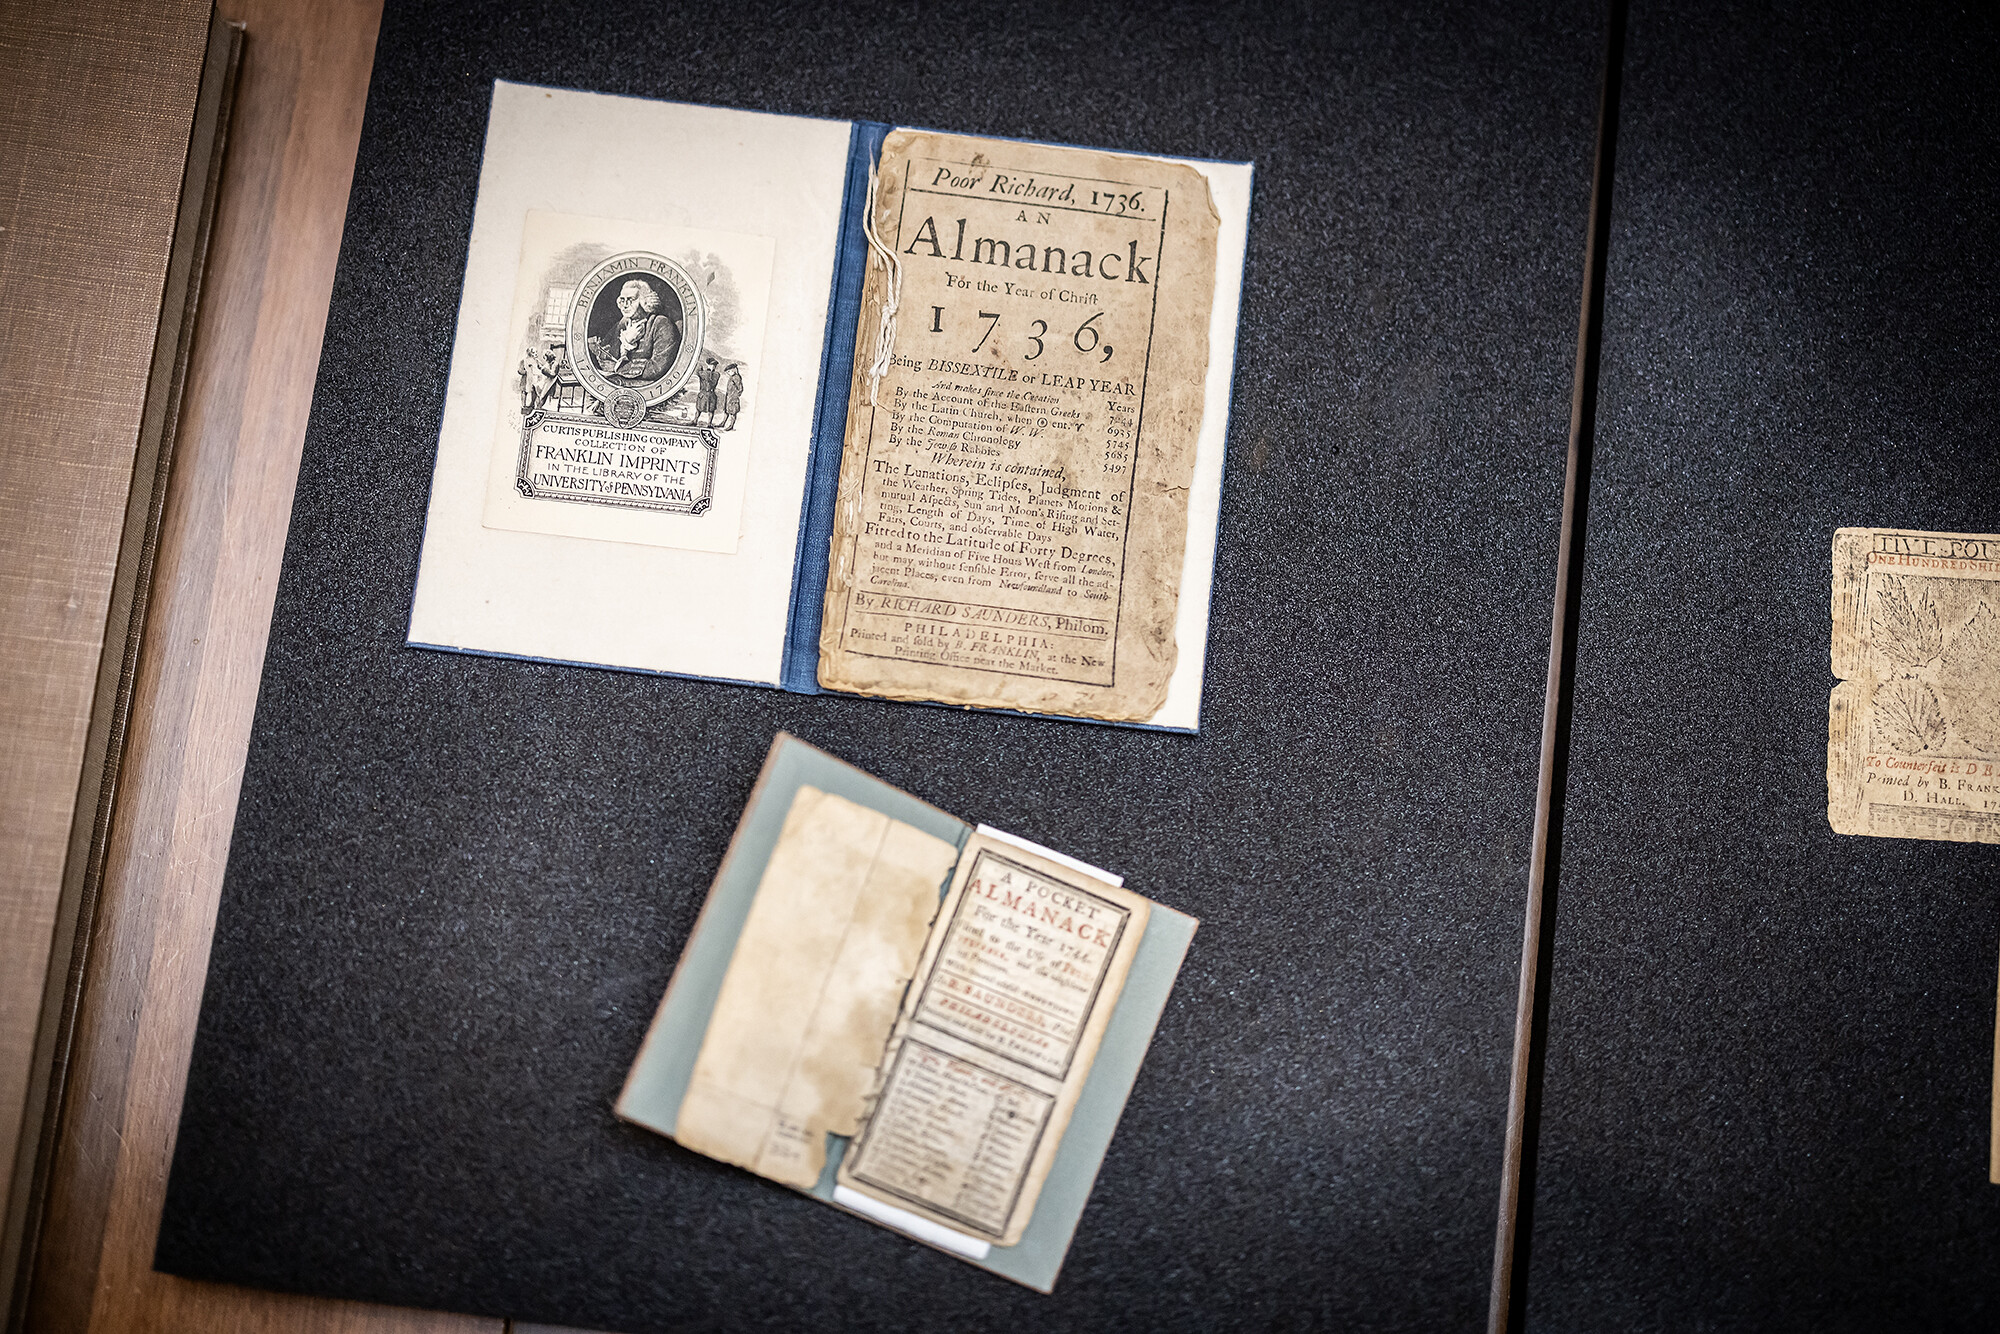 Two historic Almanacs from the 1700s and a piece of currency Ben Franklin printed.